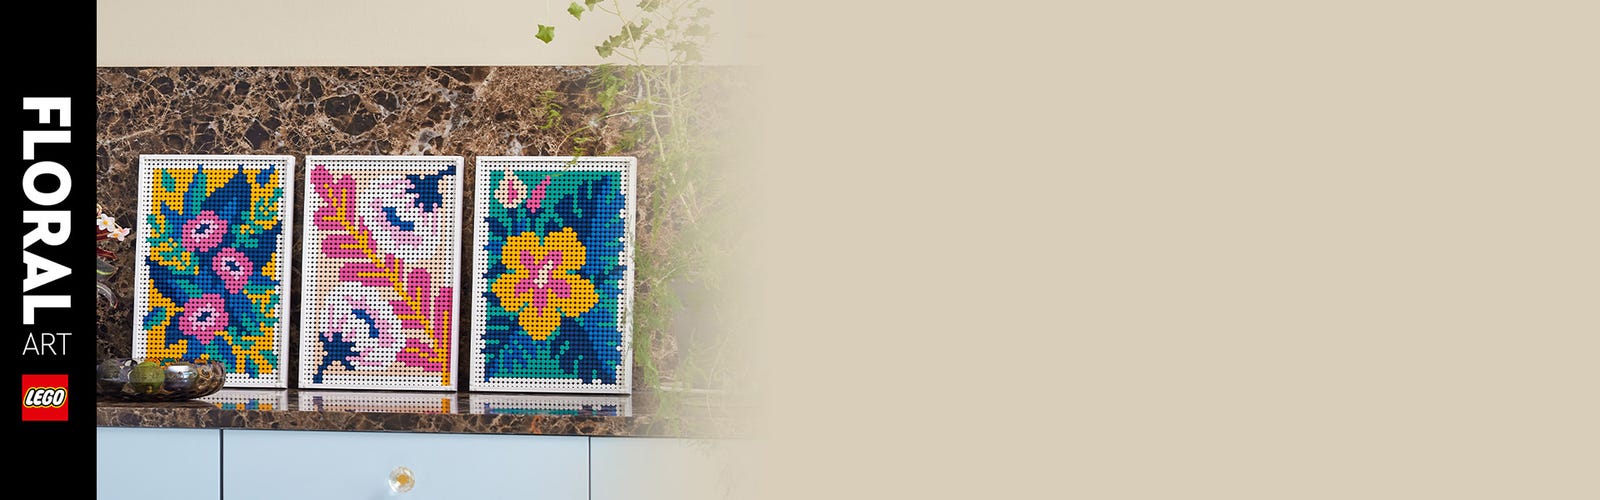 LEGO ART Floral Art 31207, 3in1 Flowers Wall Decoration Set, Arts and  Crafts for Adults, Creative Activity, DIY Botanical Home Decor, Gift Idea 